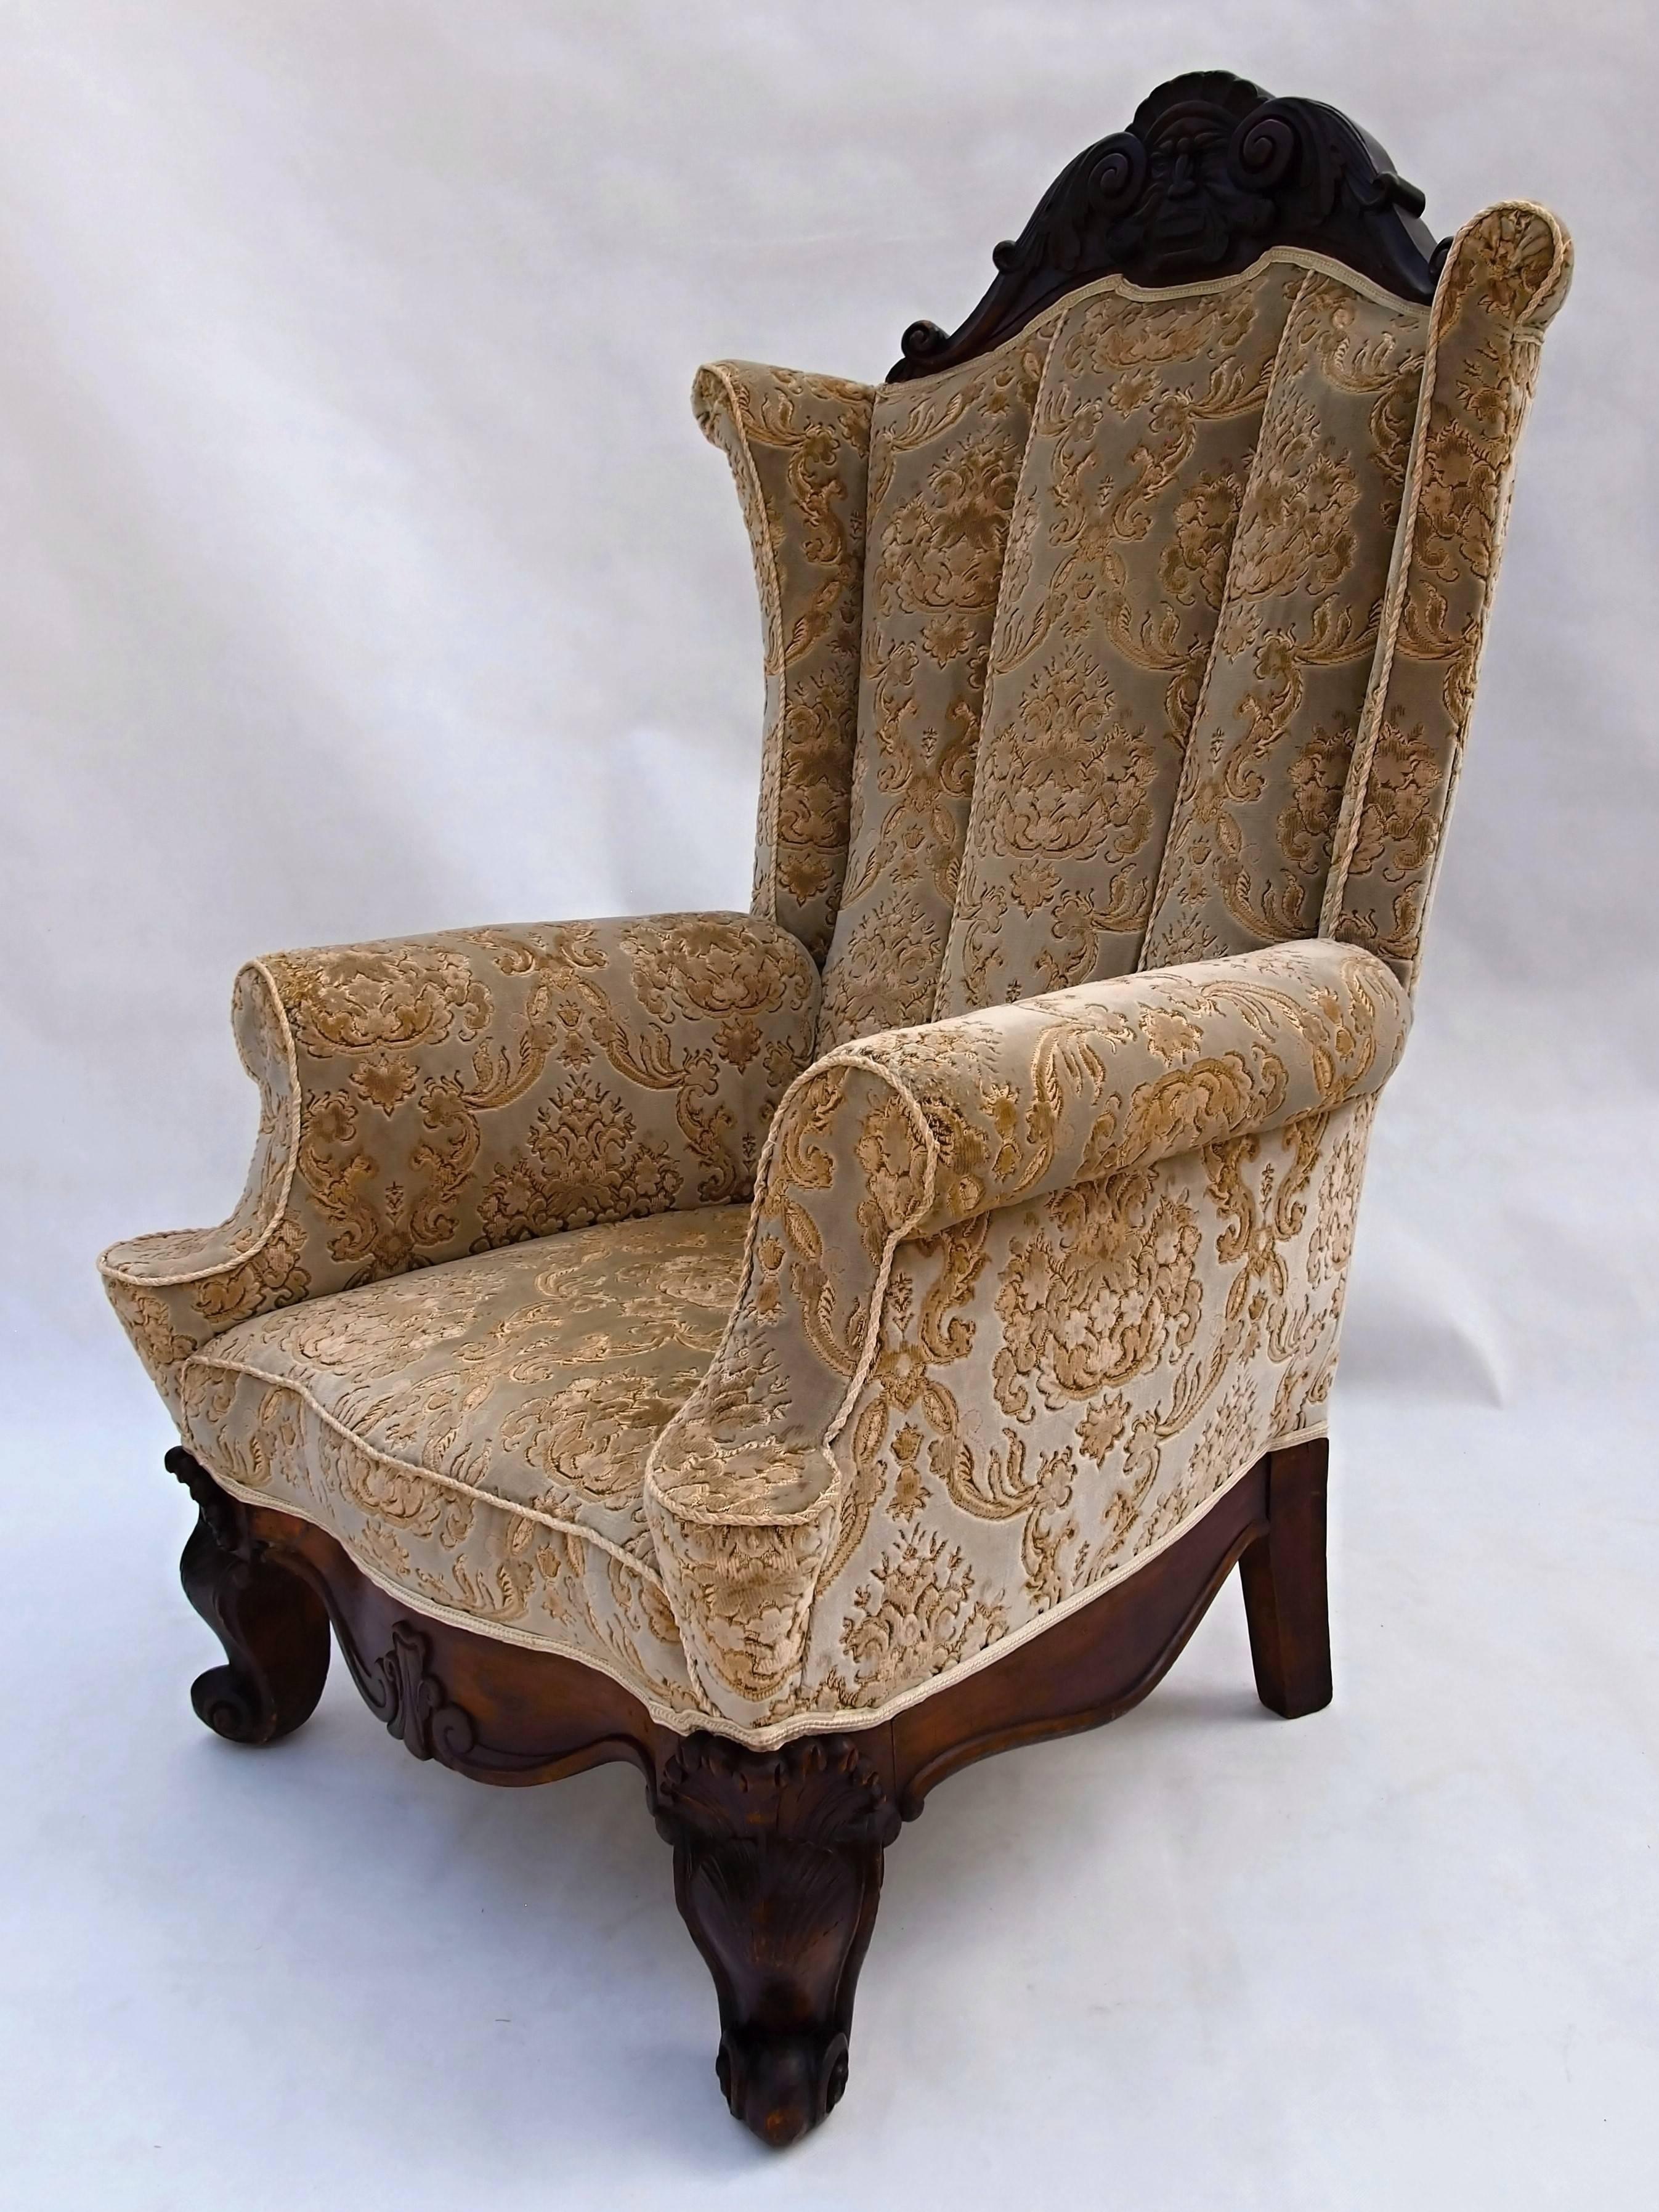 Rare gorgeous massive wing armchair with carved walnut legs and top.
The first half of 19th century.